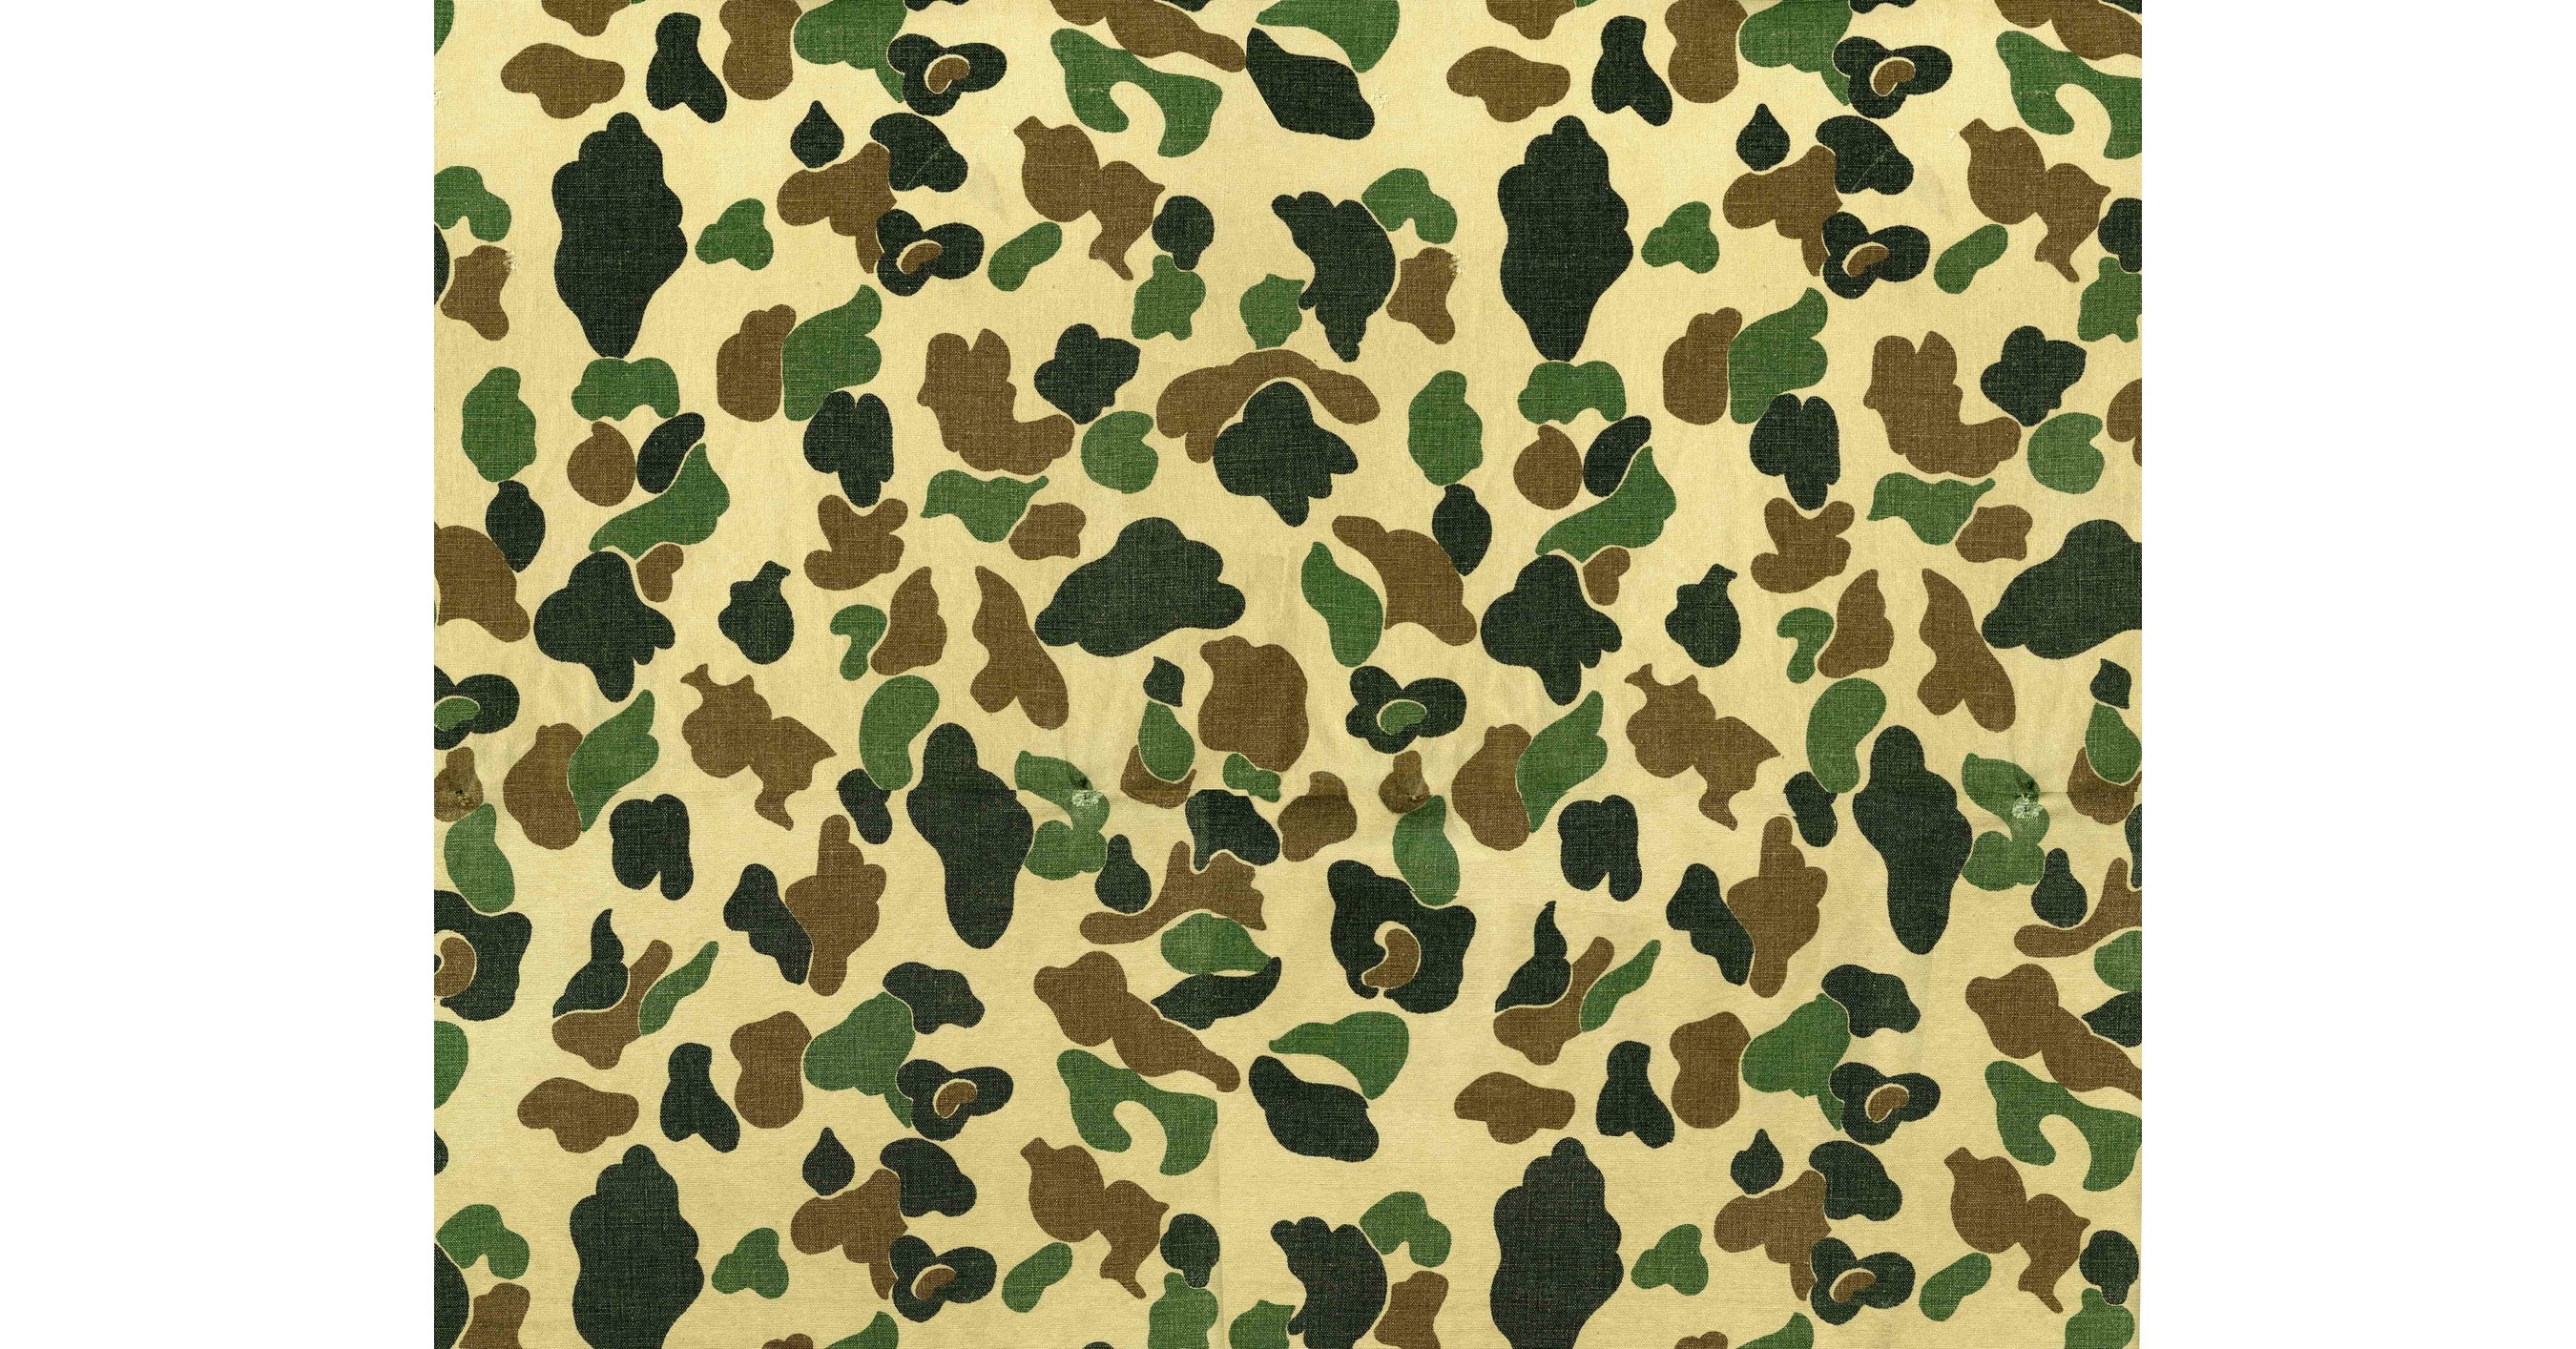 Inspired By Company's Heritage, Carhartt Reinvents Original Camo Pattern